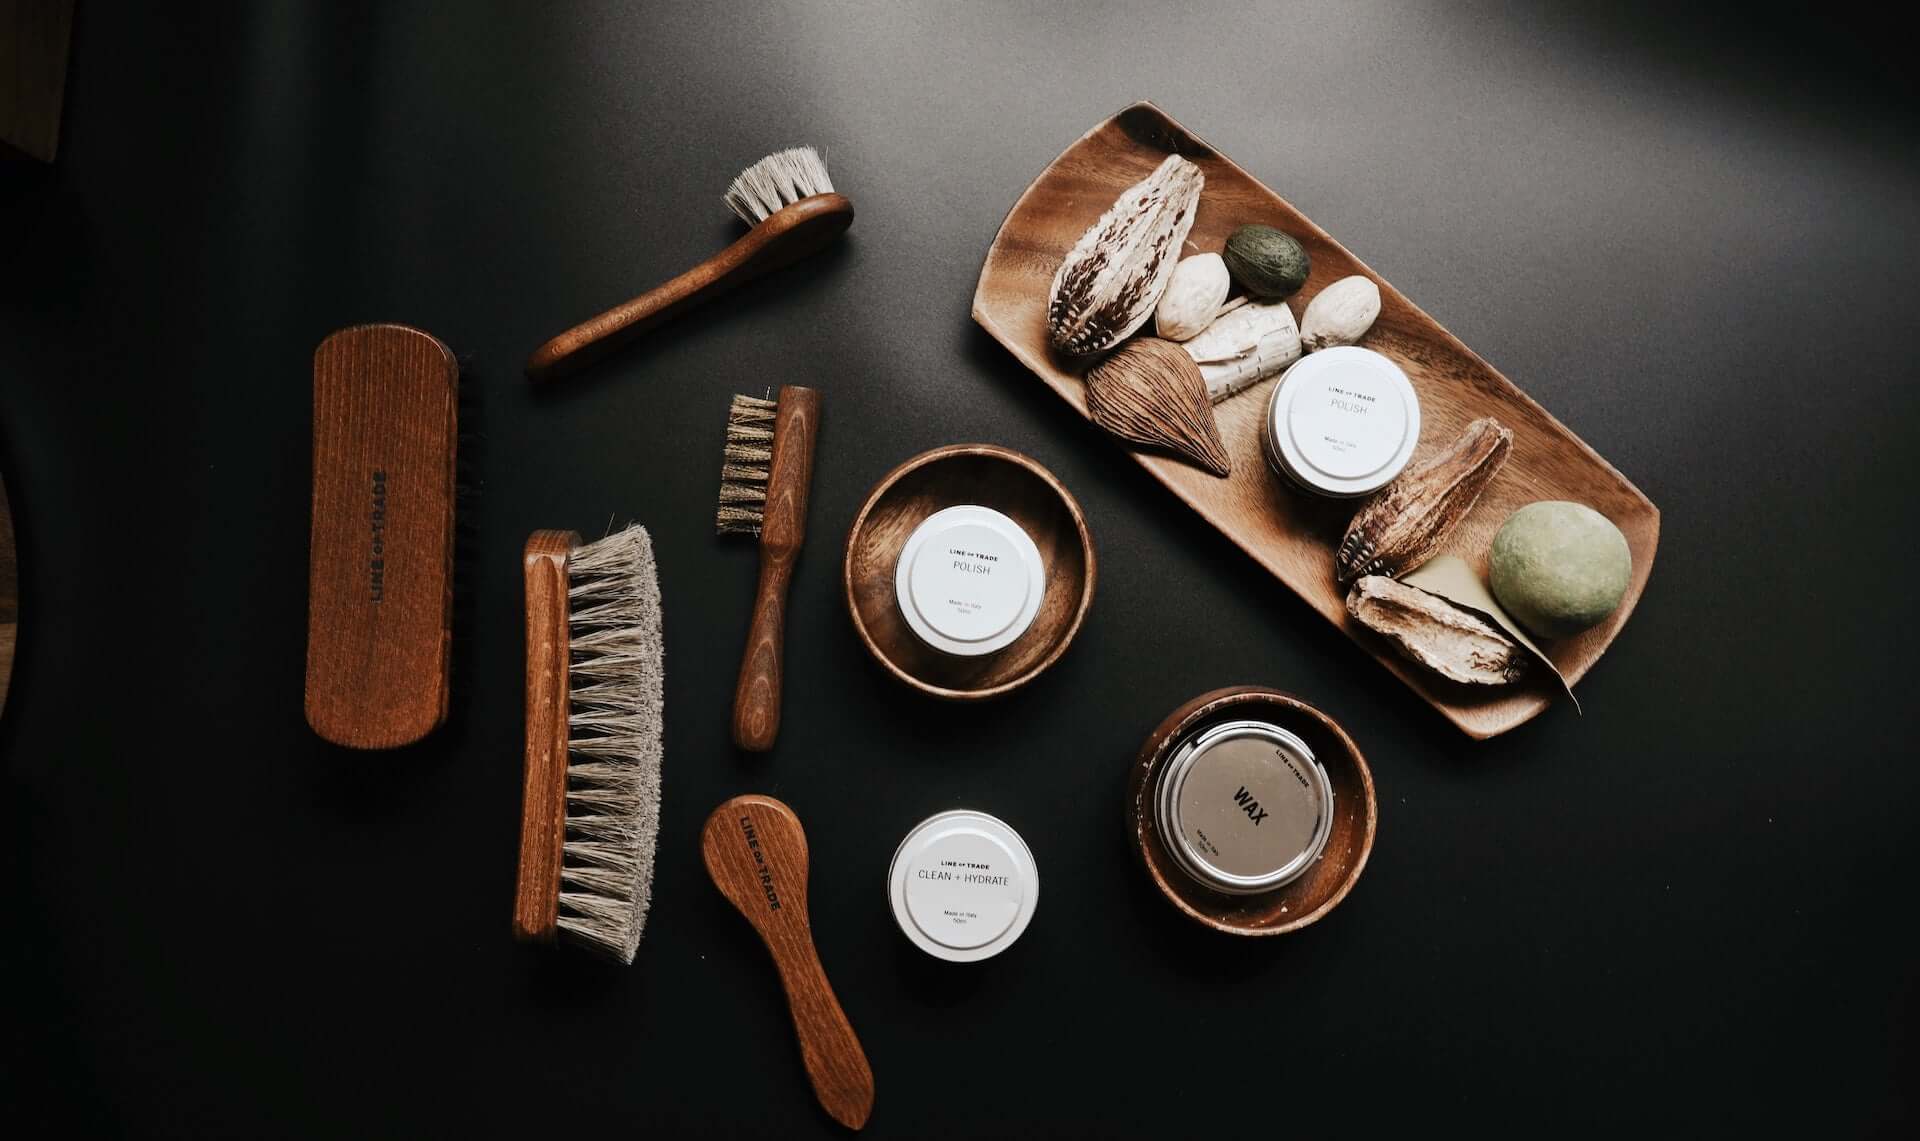 A range of leather care products including brushes and balms.